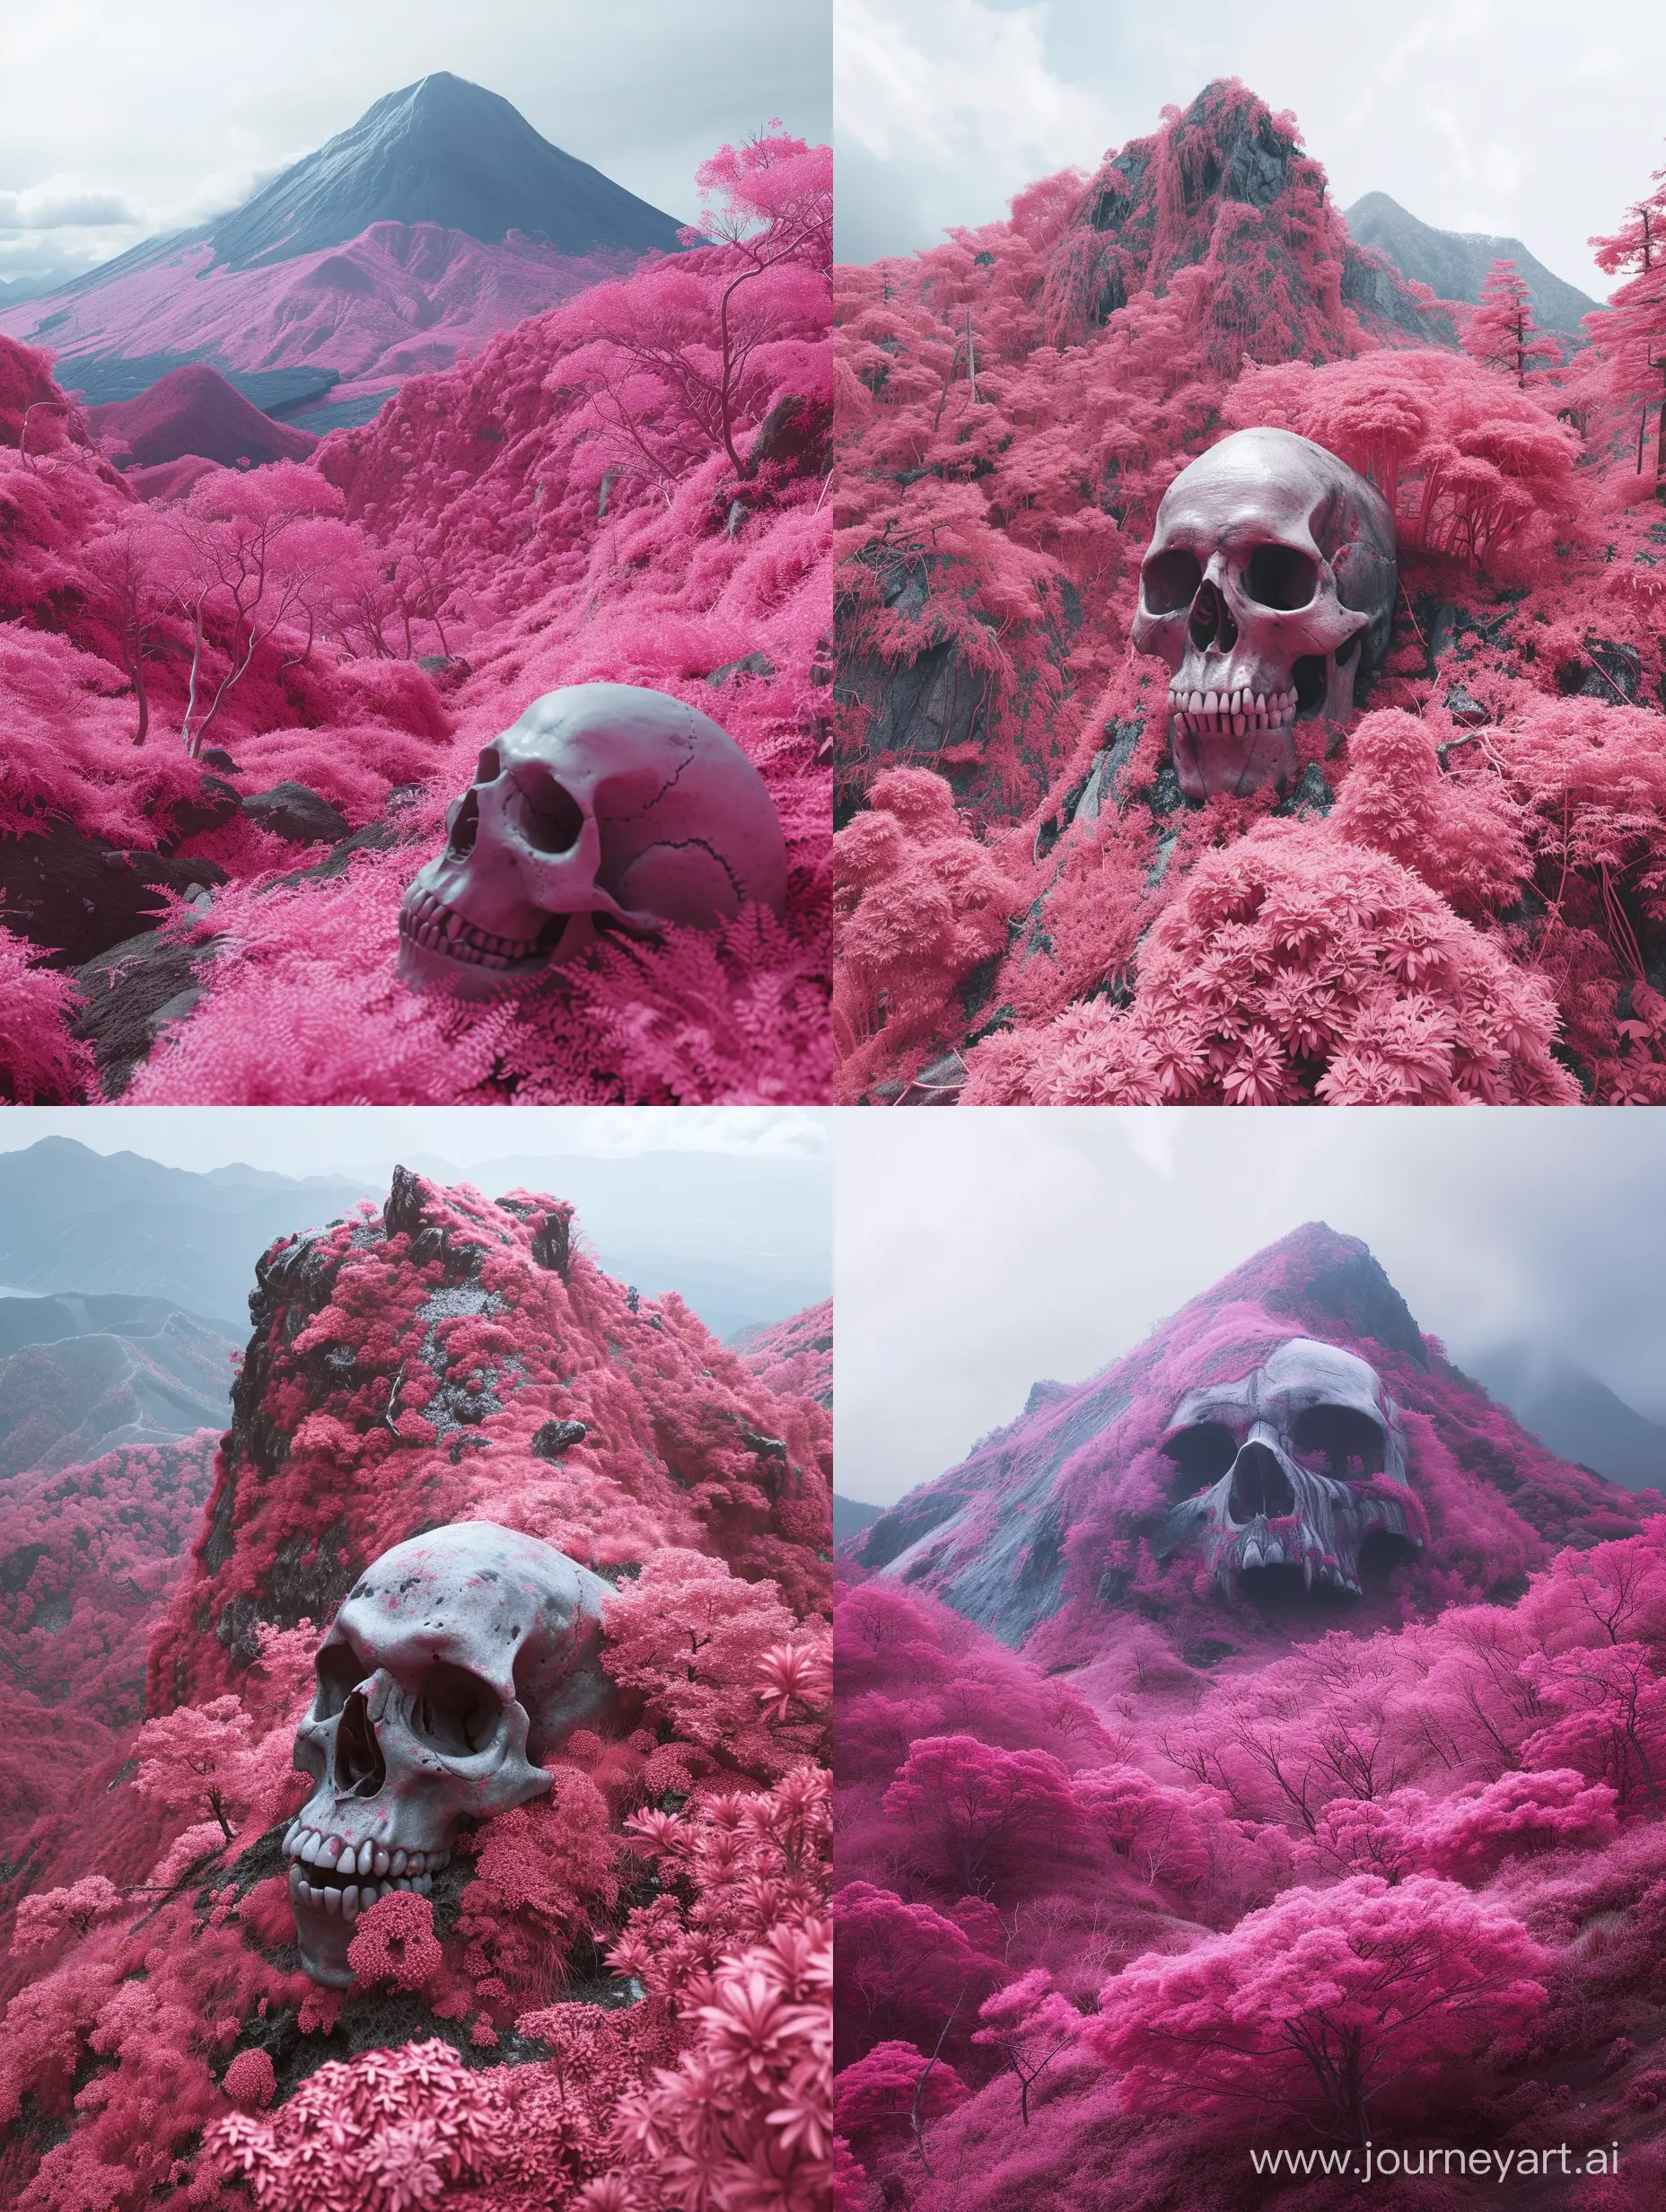 A mountain in Japan where all the vegetation is pink, the skull is very well detailed, 8k Ultra HD, hyper realistic